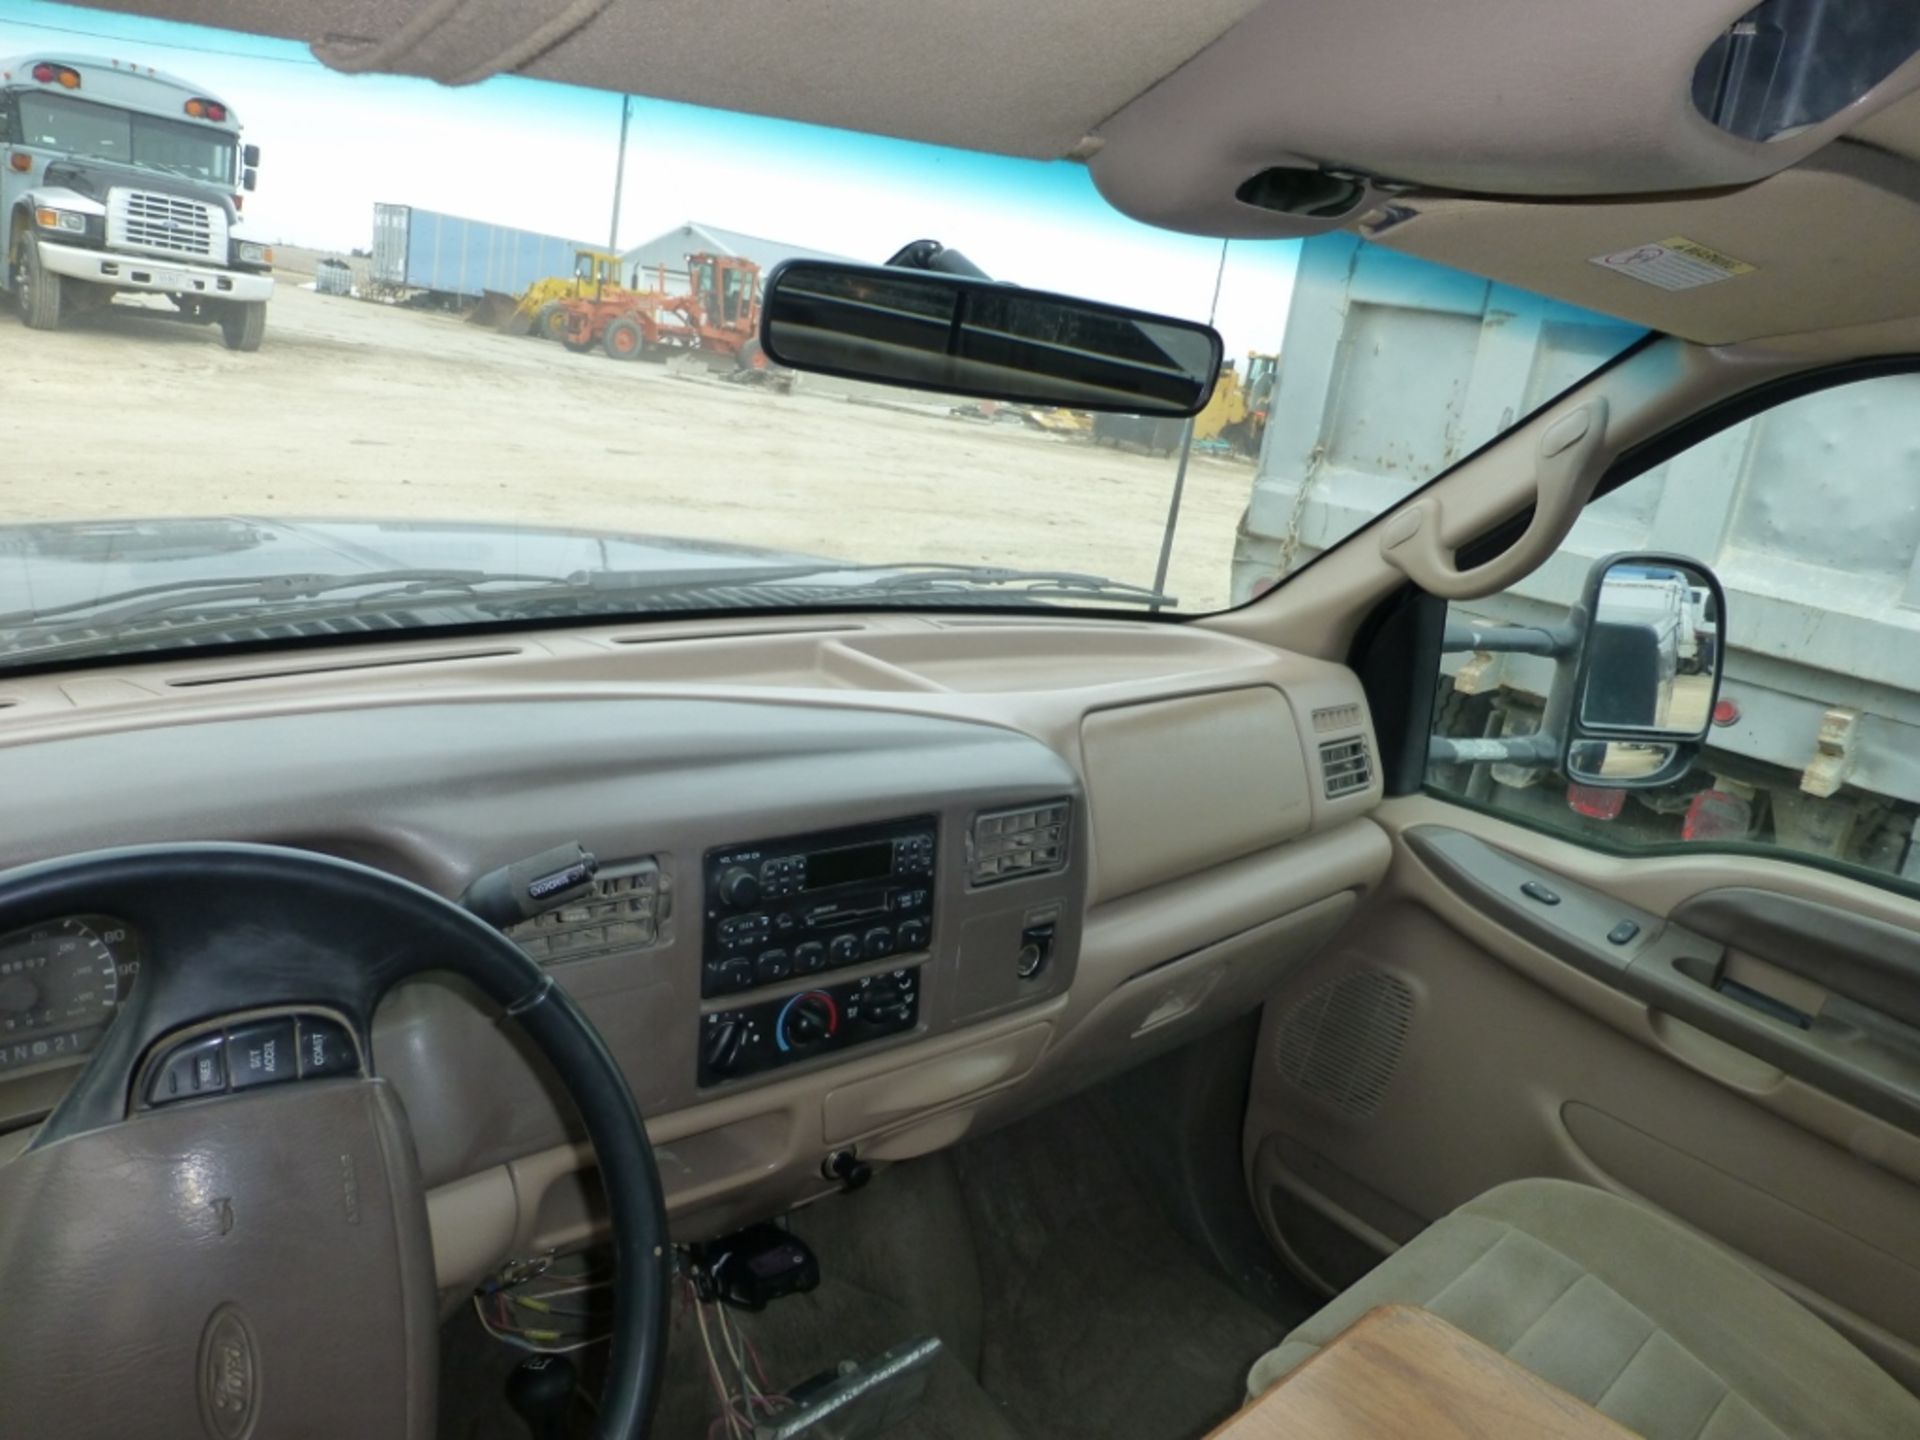 1999 Ford F350 Lariat Crew Cab, 4x4, 7.3 Diesel engine, 208,897 unverified miles, w/ utility bed. - Image 10 of 22